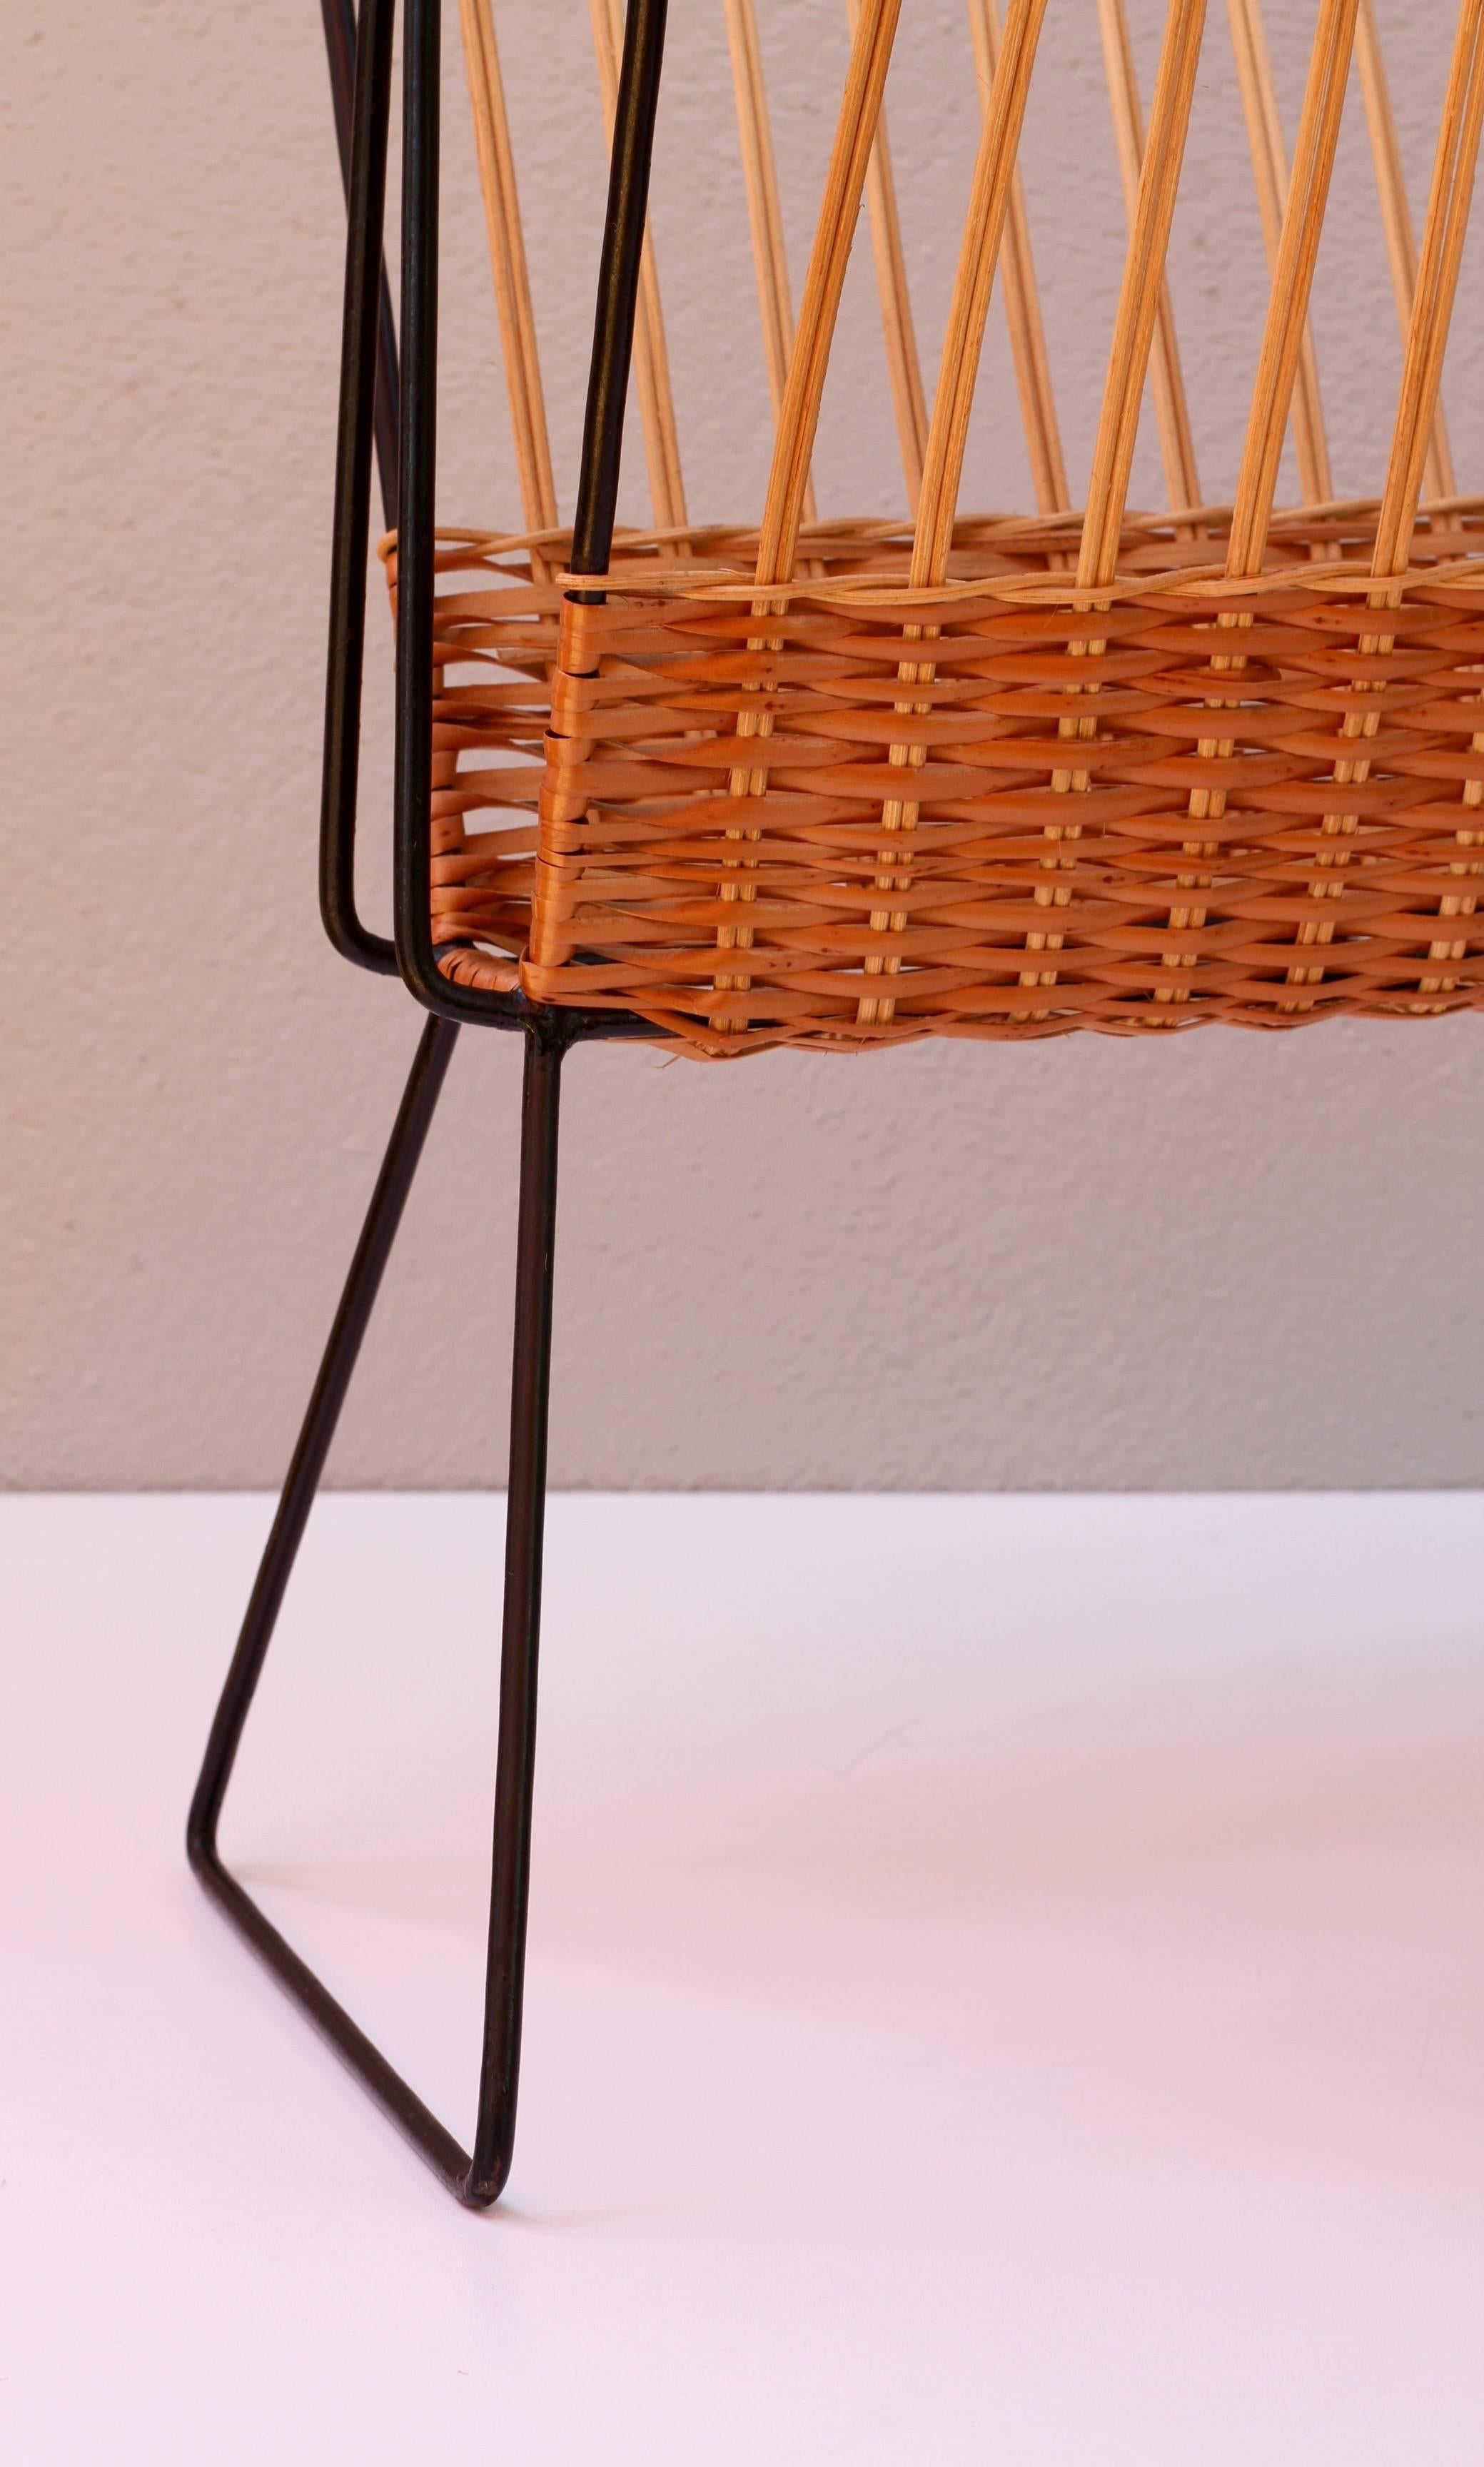 Large Mid-Century Modernist Wicker Magazine Rack Stand Attributed to Carl Auböck 1